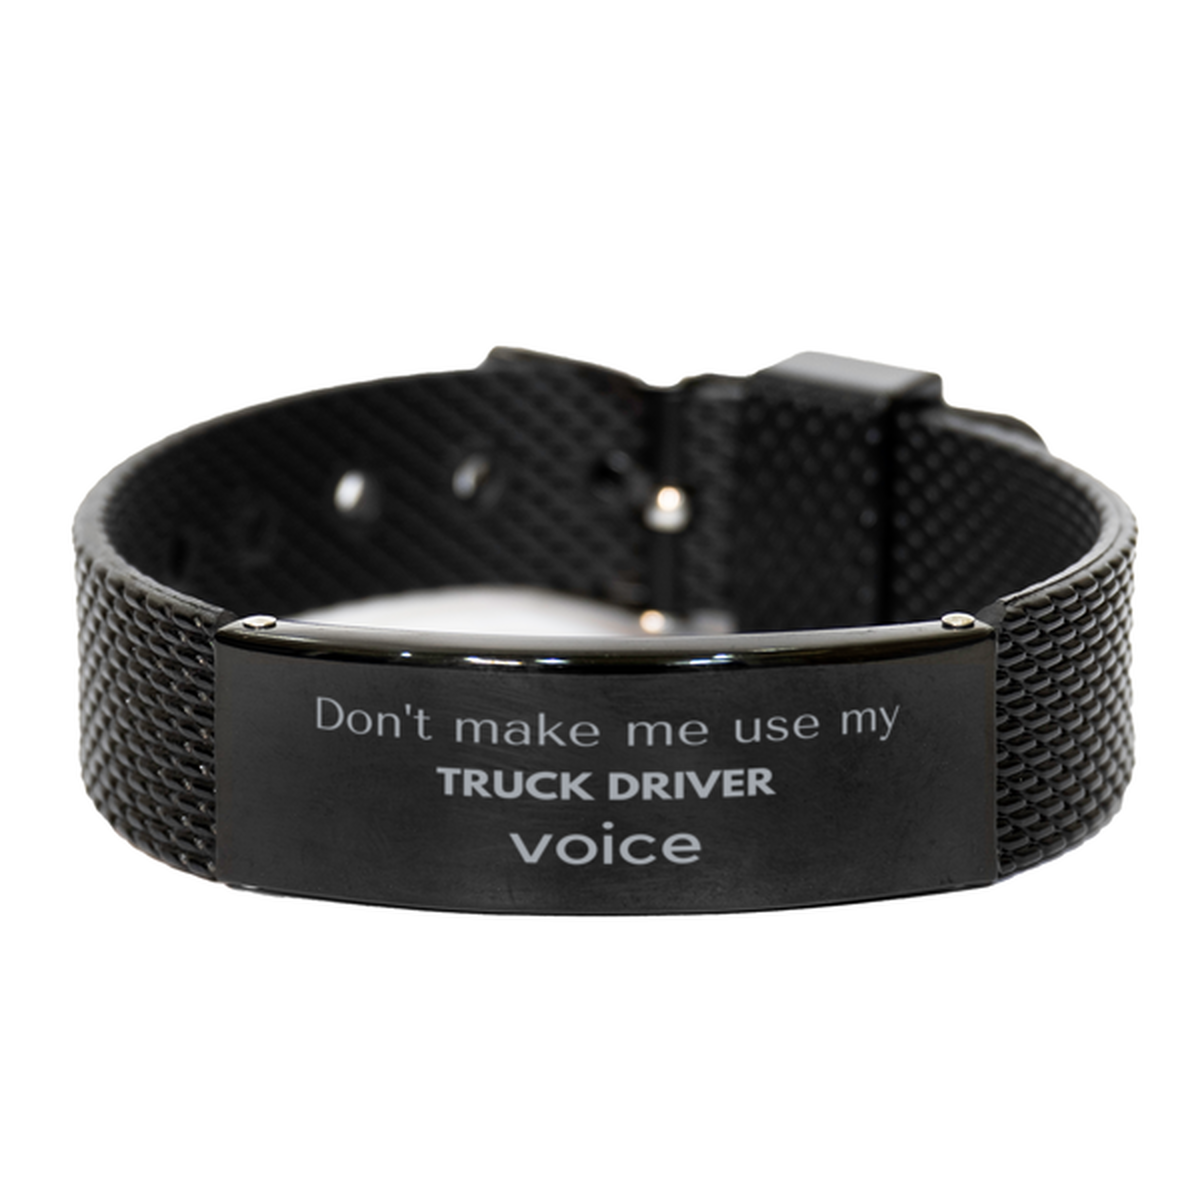 Don't make me use my Truck Driver voice, Sarcasm Truck Driver Gifts, Christmas Truck Driver Black Shark Mesh Bracelet Birthday Unique Gifts For Truck Driver Coworkers, Men, Women, Colleague, Friends